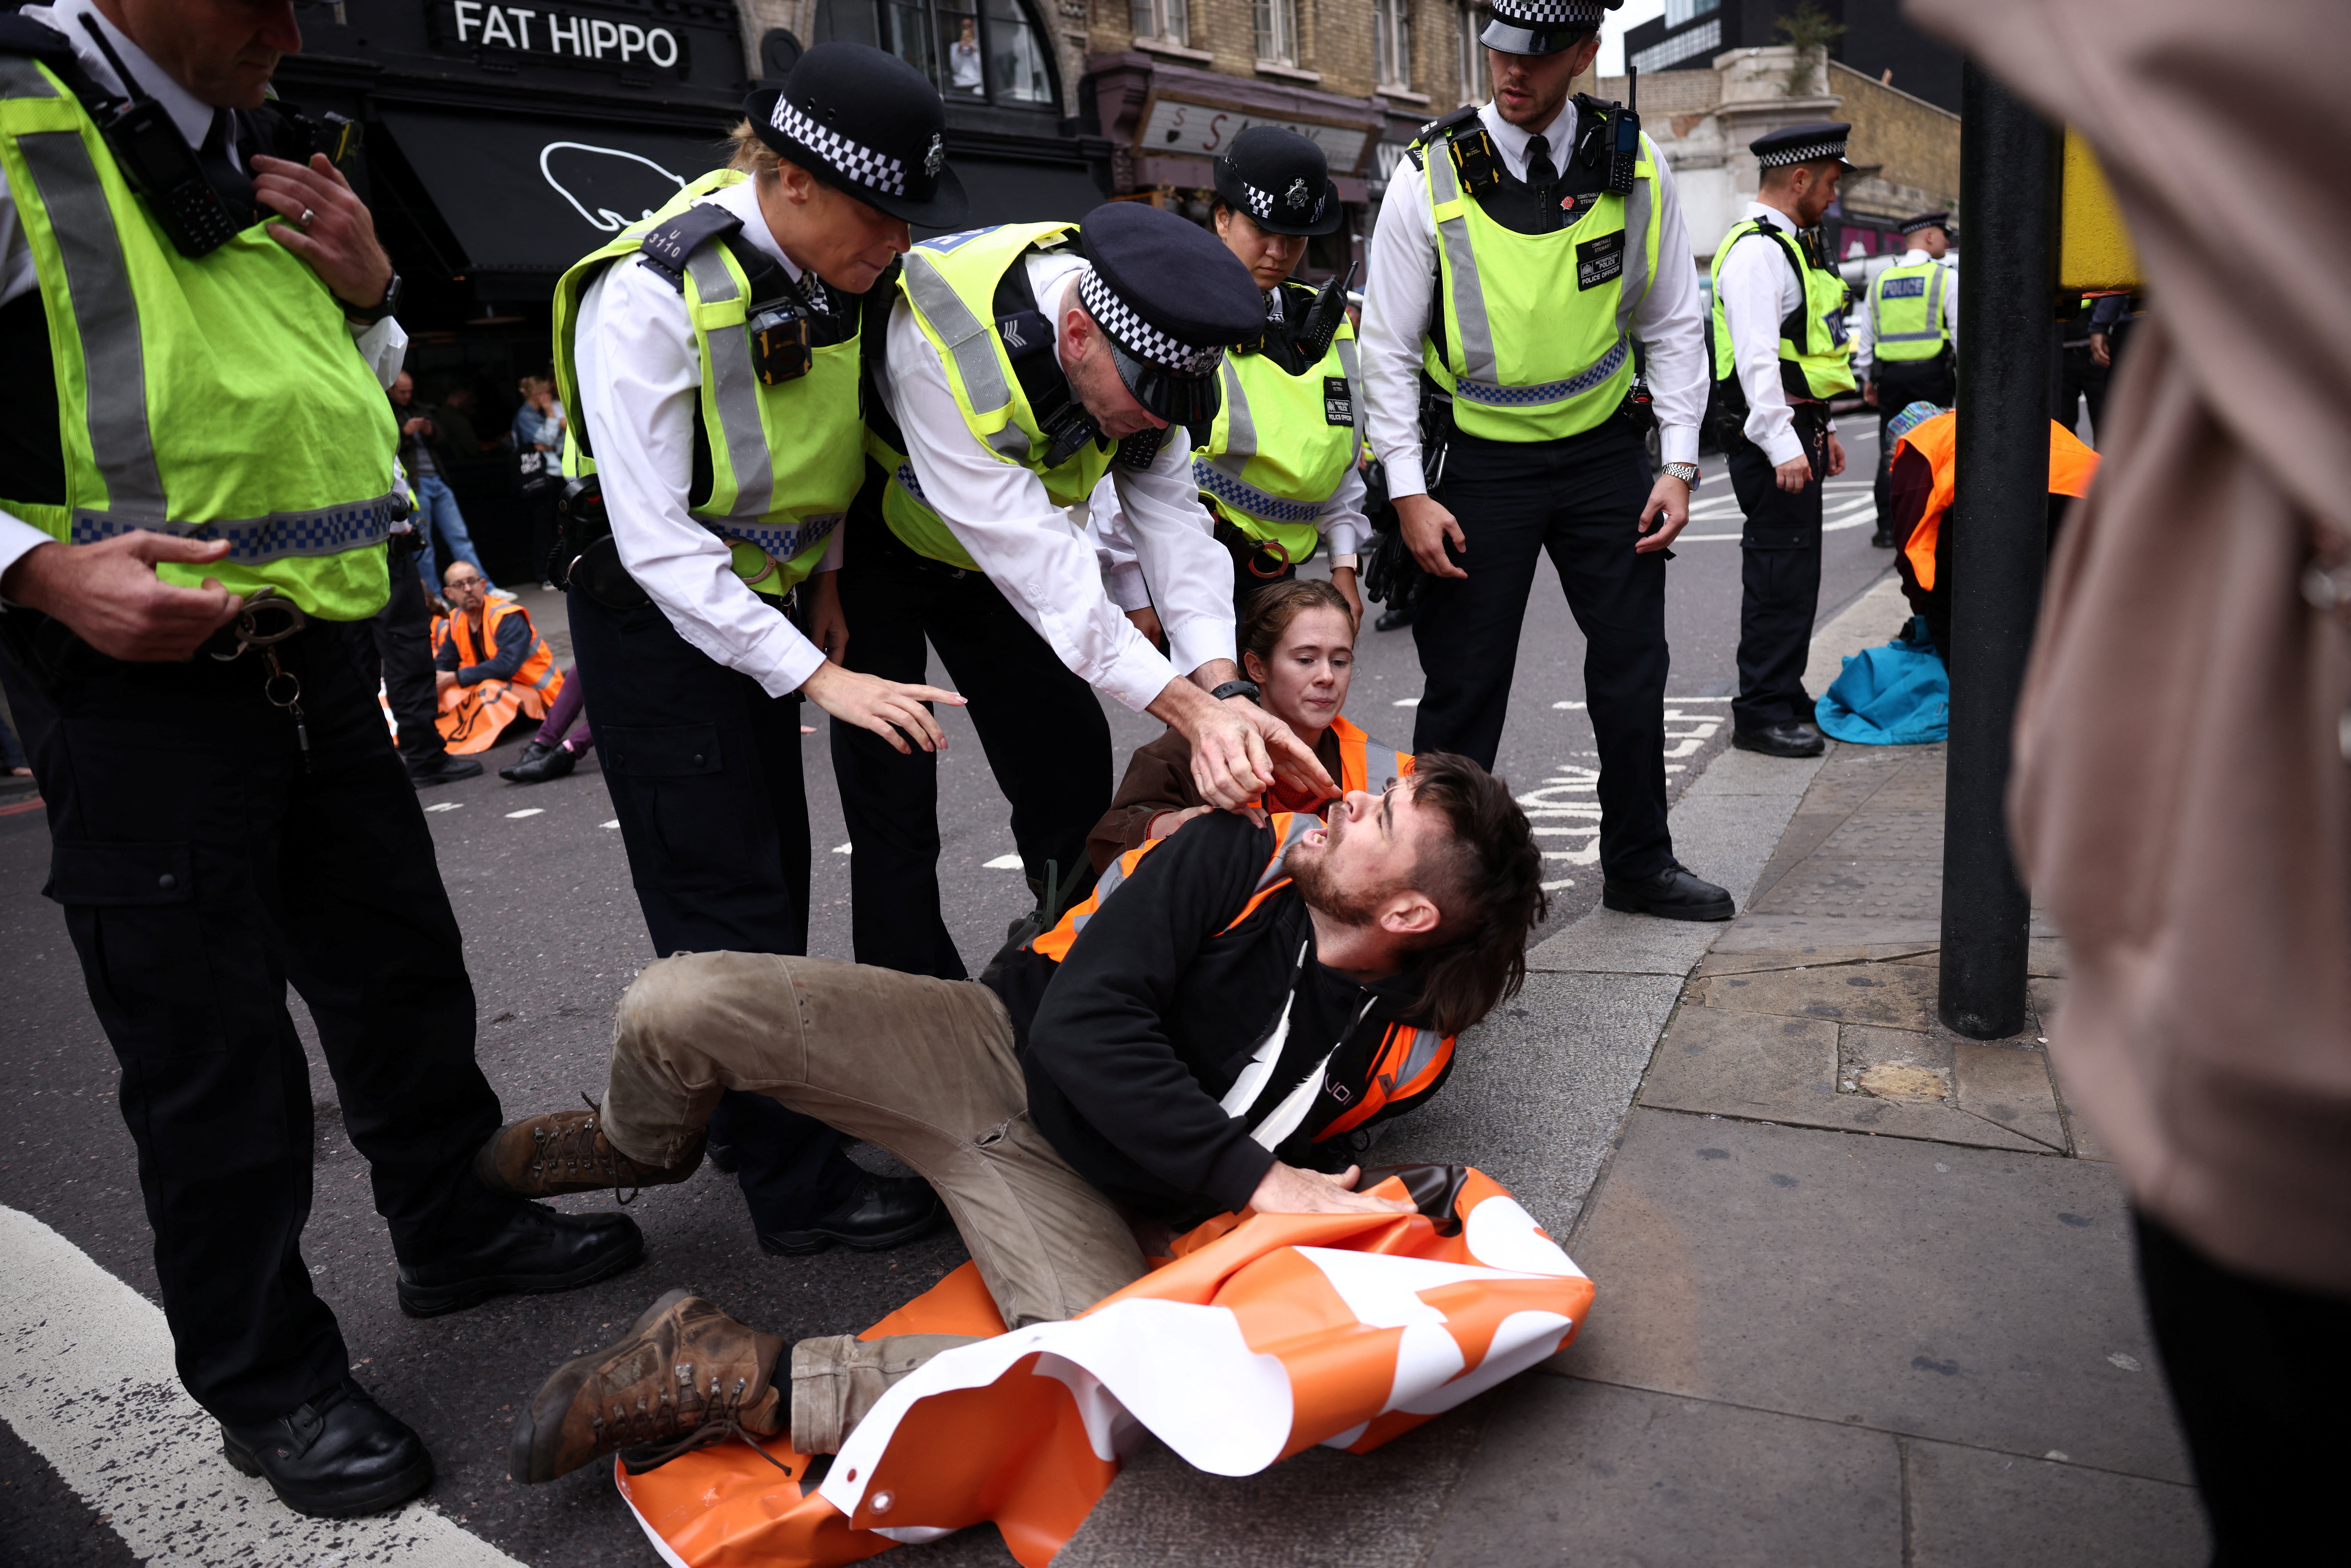 Police tackle an activist blocking the road in Shoreditch